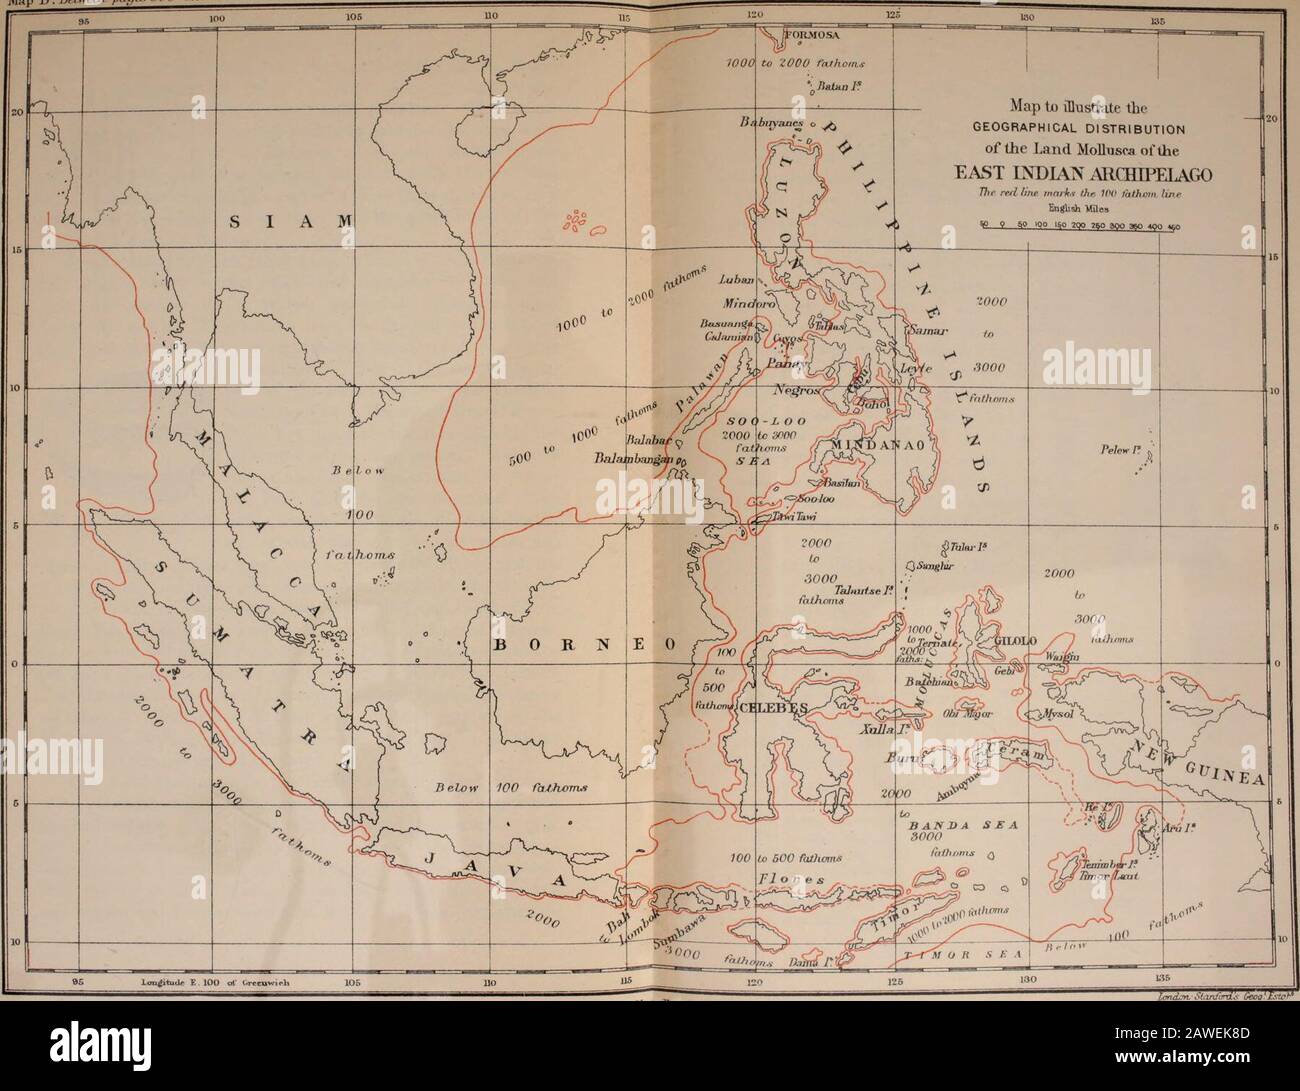 The Cambridge natural history . tcnd^yv SianJarci.s GcoQ^T^^y* Map ]3 ? BeJwccn piif](.s 308 nnd .Wf). taadon MsamDiui & c«. TAVA AND BORNEO JO9 It seems not impossiljle, from the point of view of the landMolhisca only, that the Sunda Islands may at one time havestretched nuich farther into the Bay of Bengal, prolonged, per-haps, into what are now the Andaman and Nicobar groups,while Ceylon and the western side of the Deccan, united into onecontinuous piece of land, and possibly separated from N. India Ijya wide stretch of sea, extended farther eastw^ard in a long island,or series of islands. Stock Photo